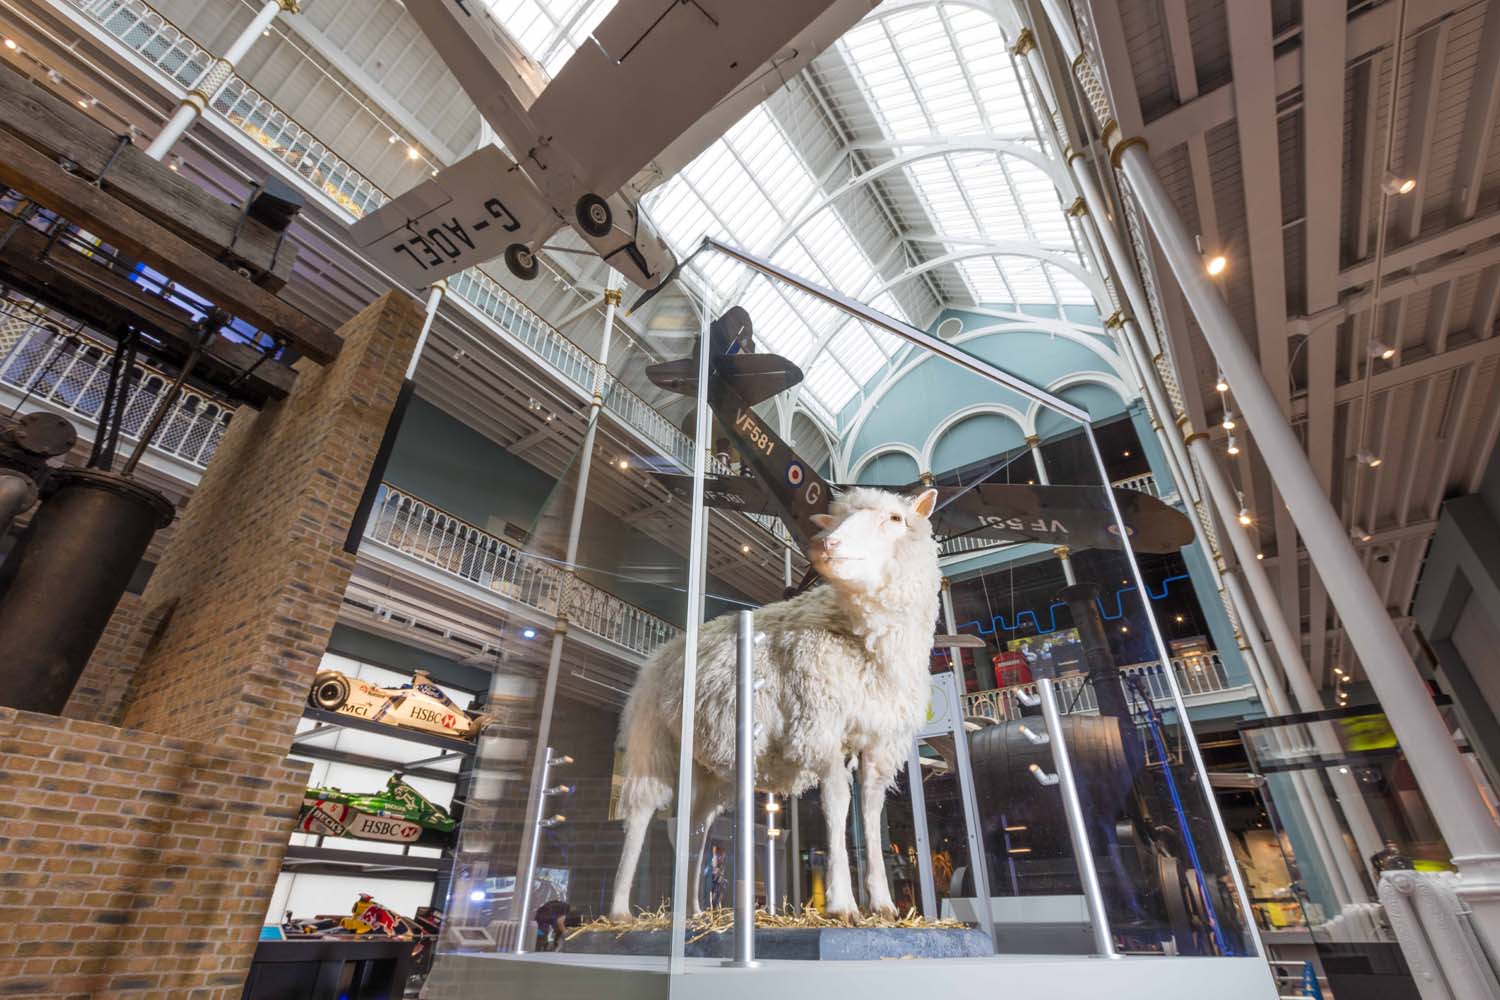 Dolly the sheep in a glass case surrounded by vehicle displays in the Science and Technology galleries. 